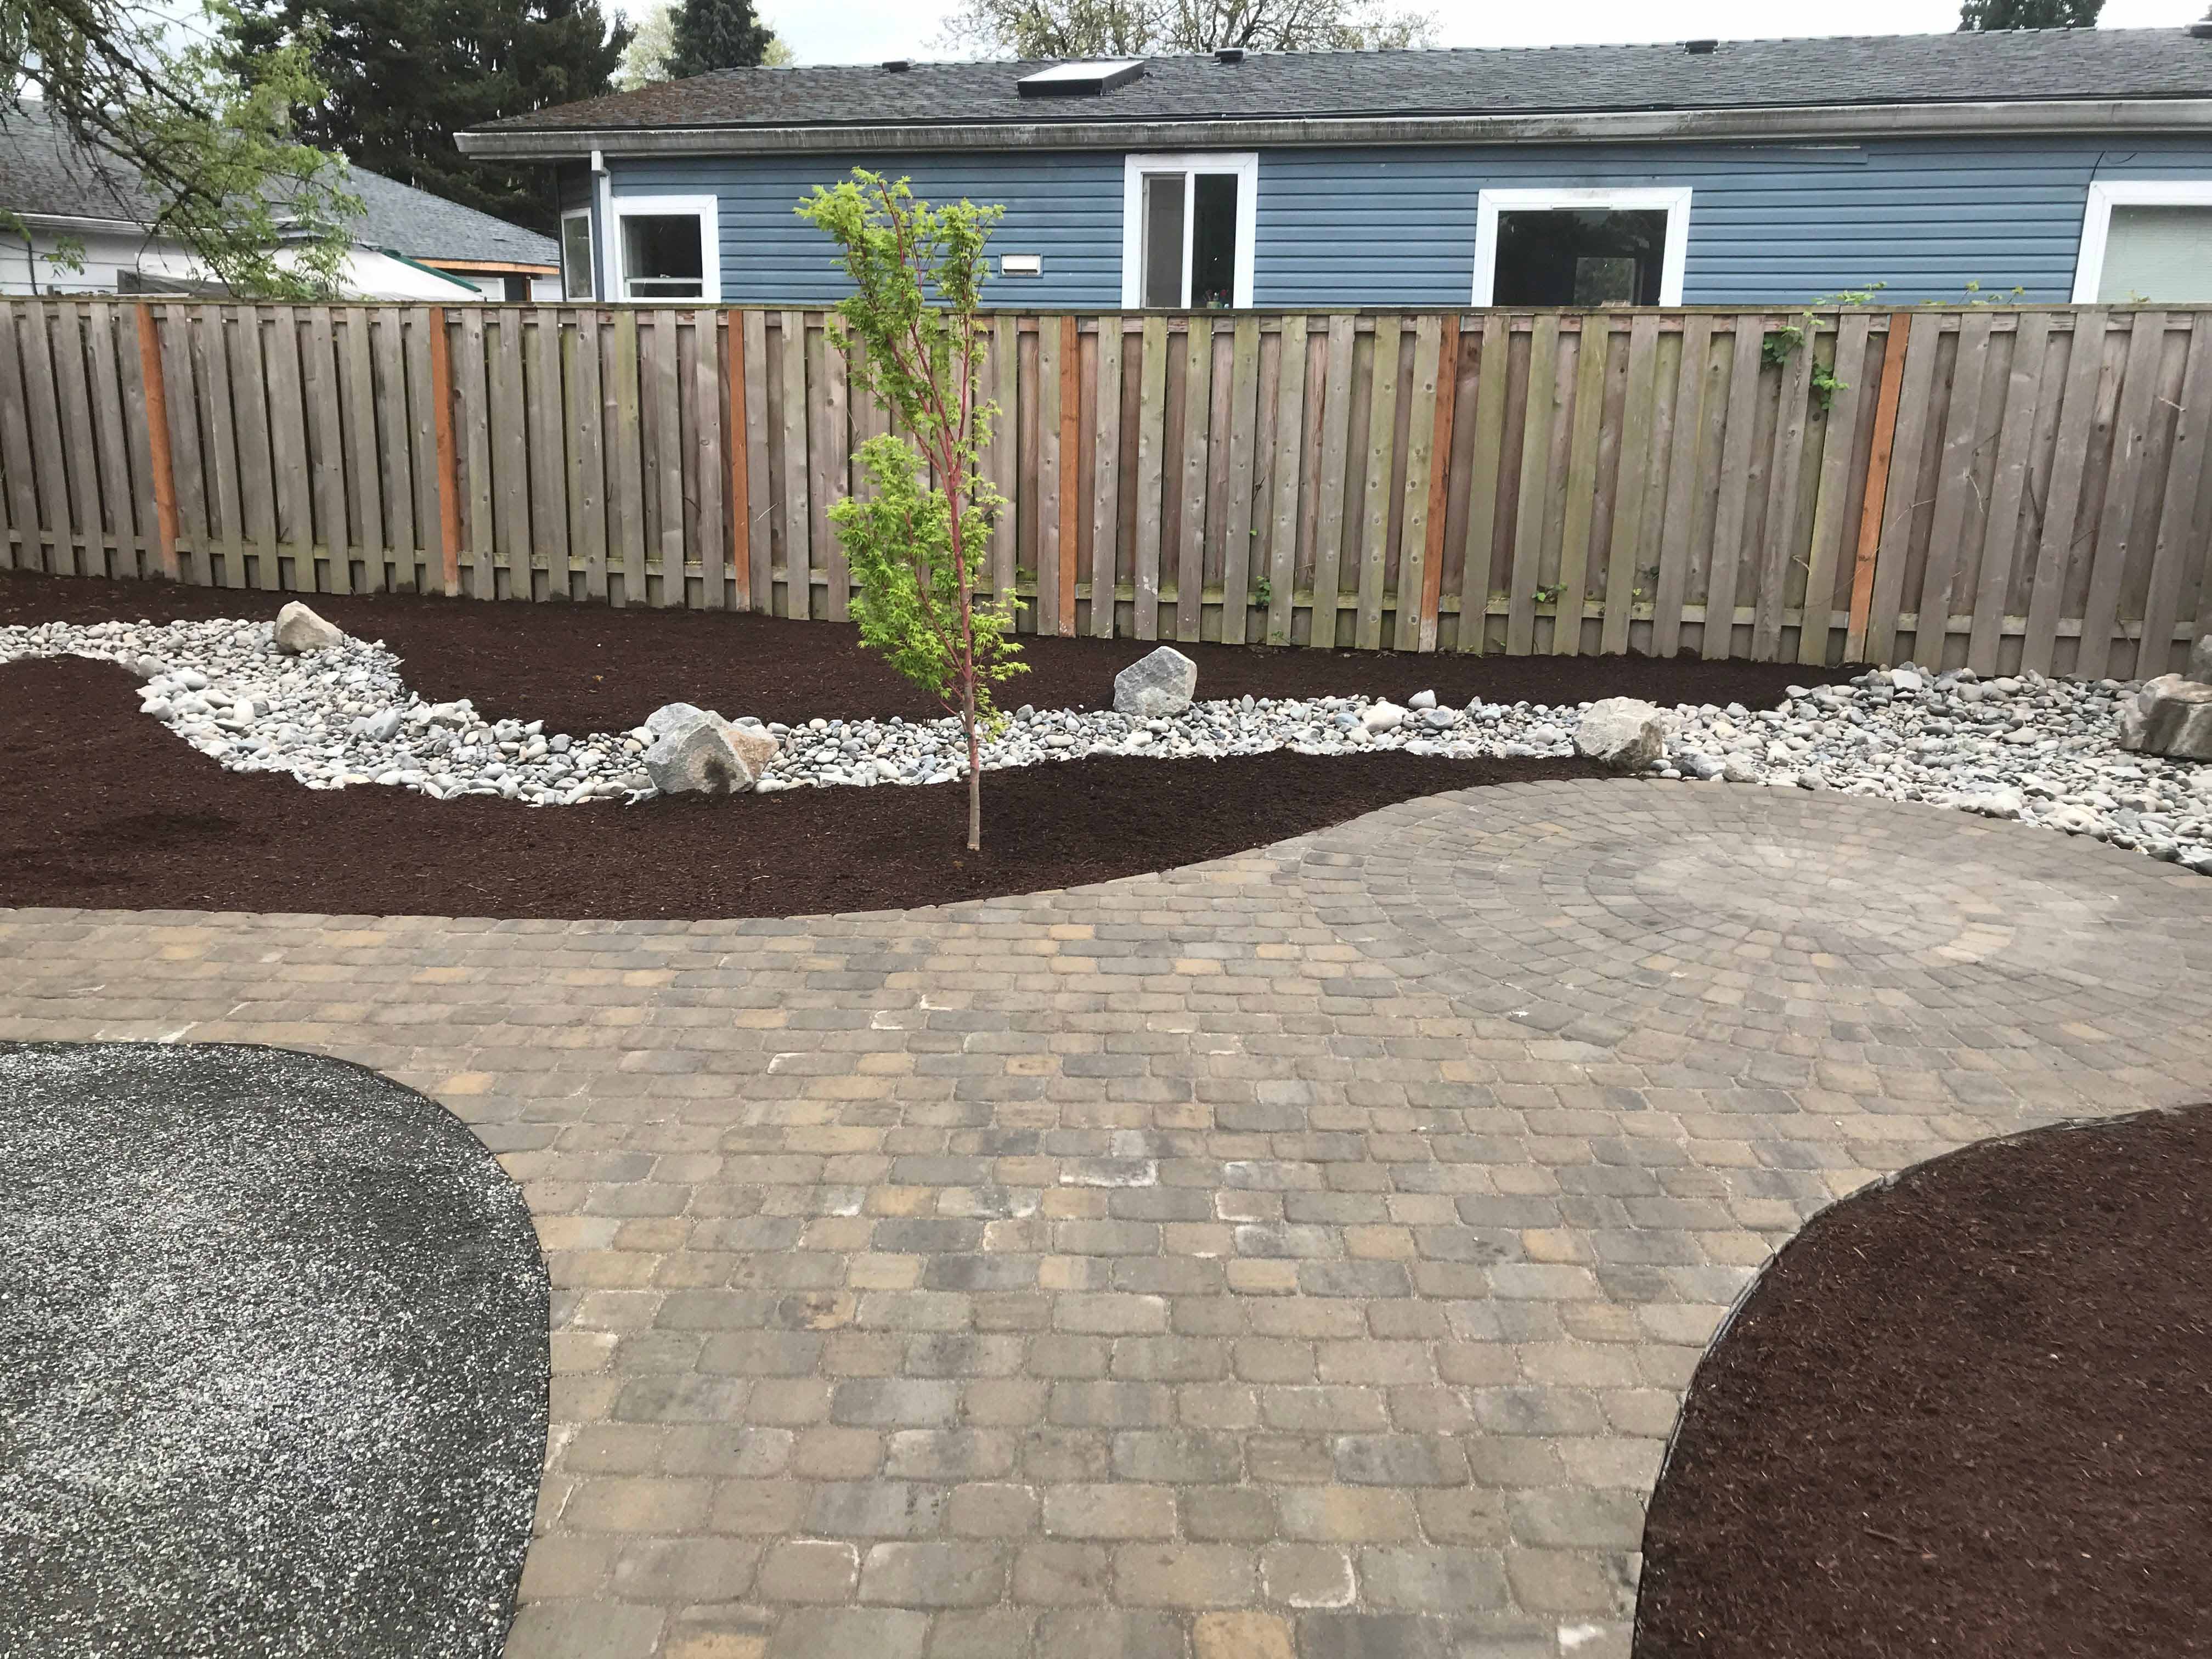 Remodeled backyard with brick path, mulched area and stone filled section